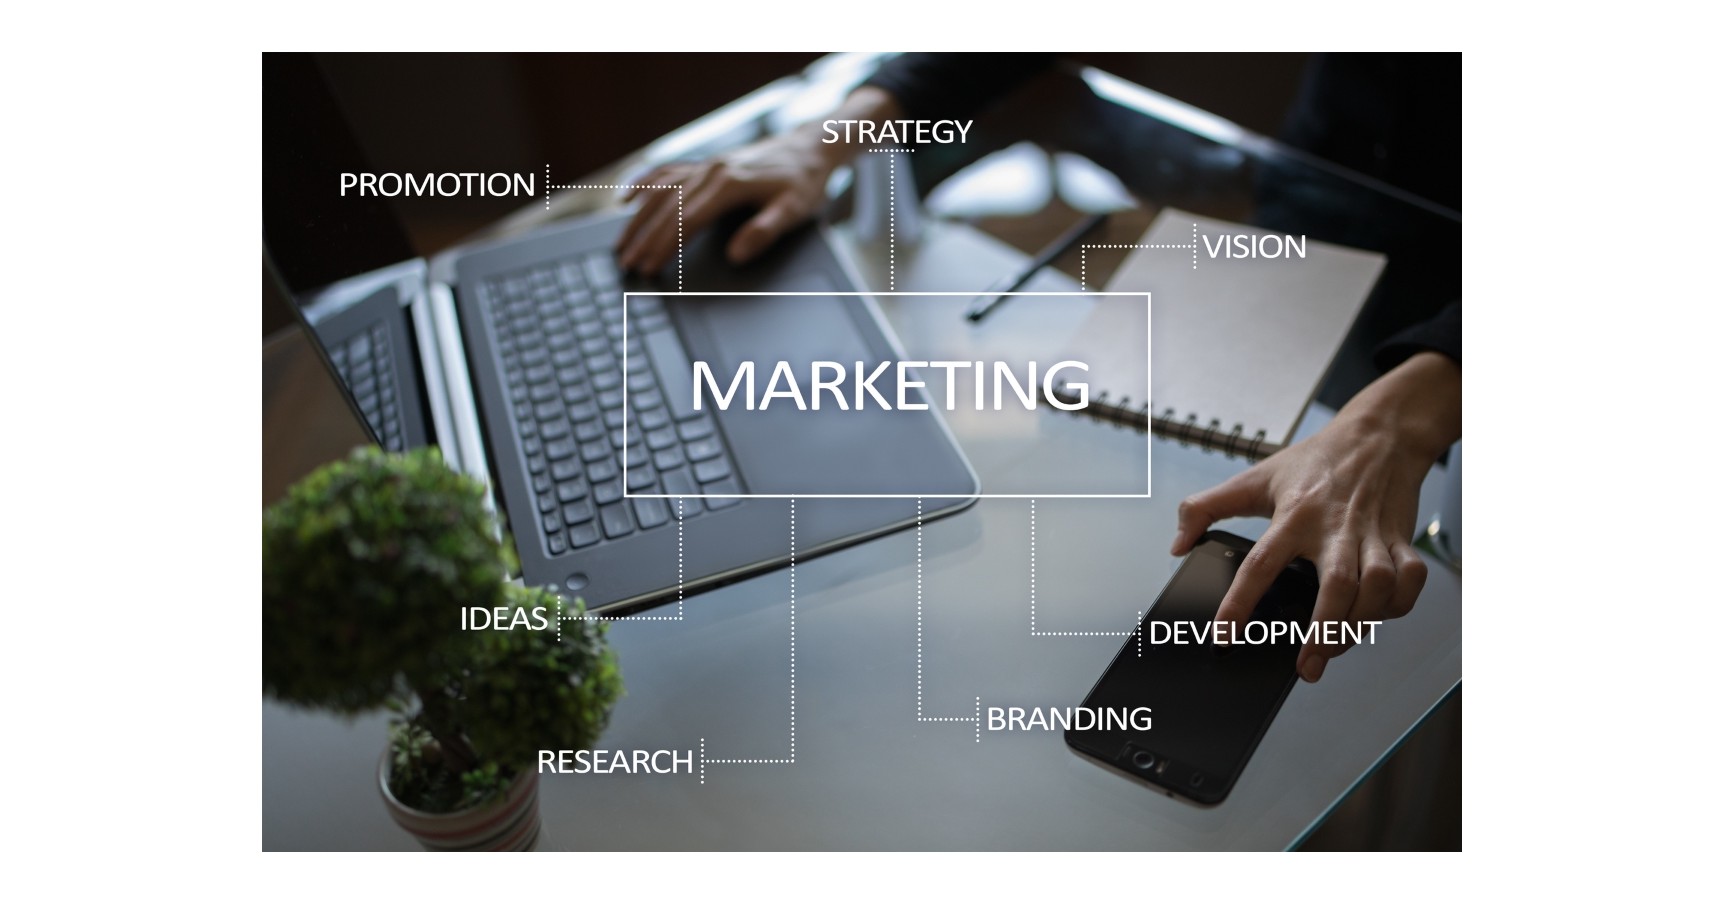 7 Marketing Promotion Ideas to Drive Sales